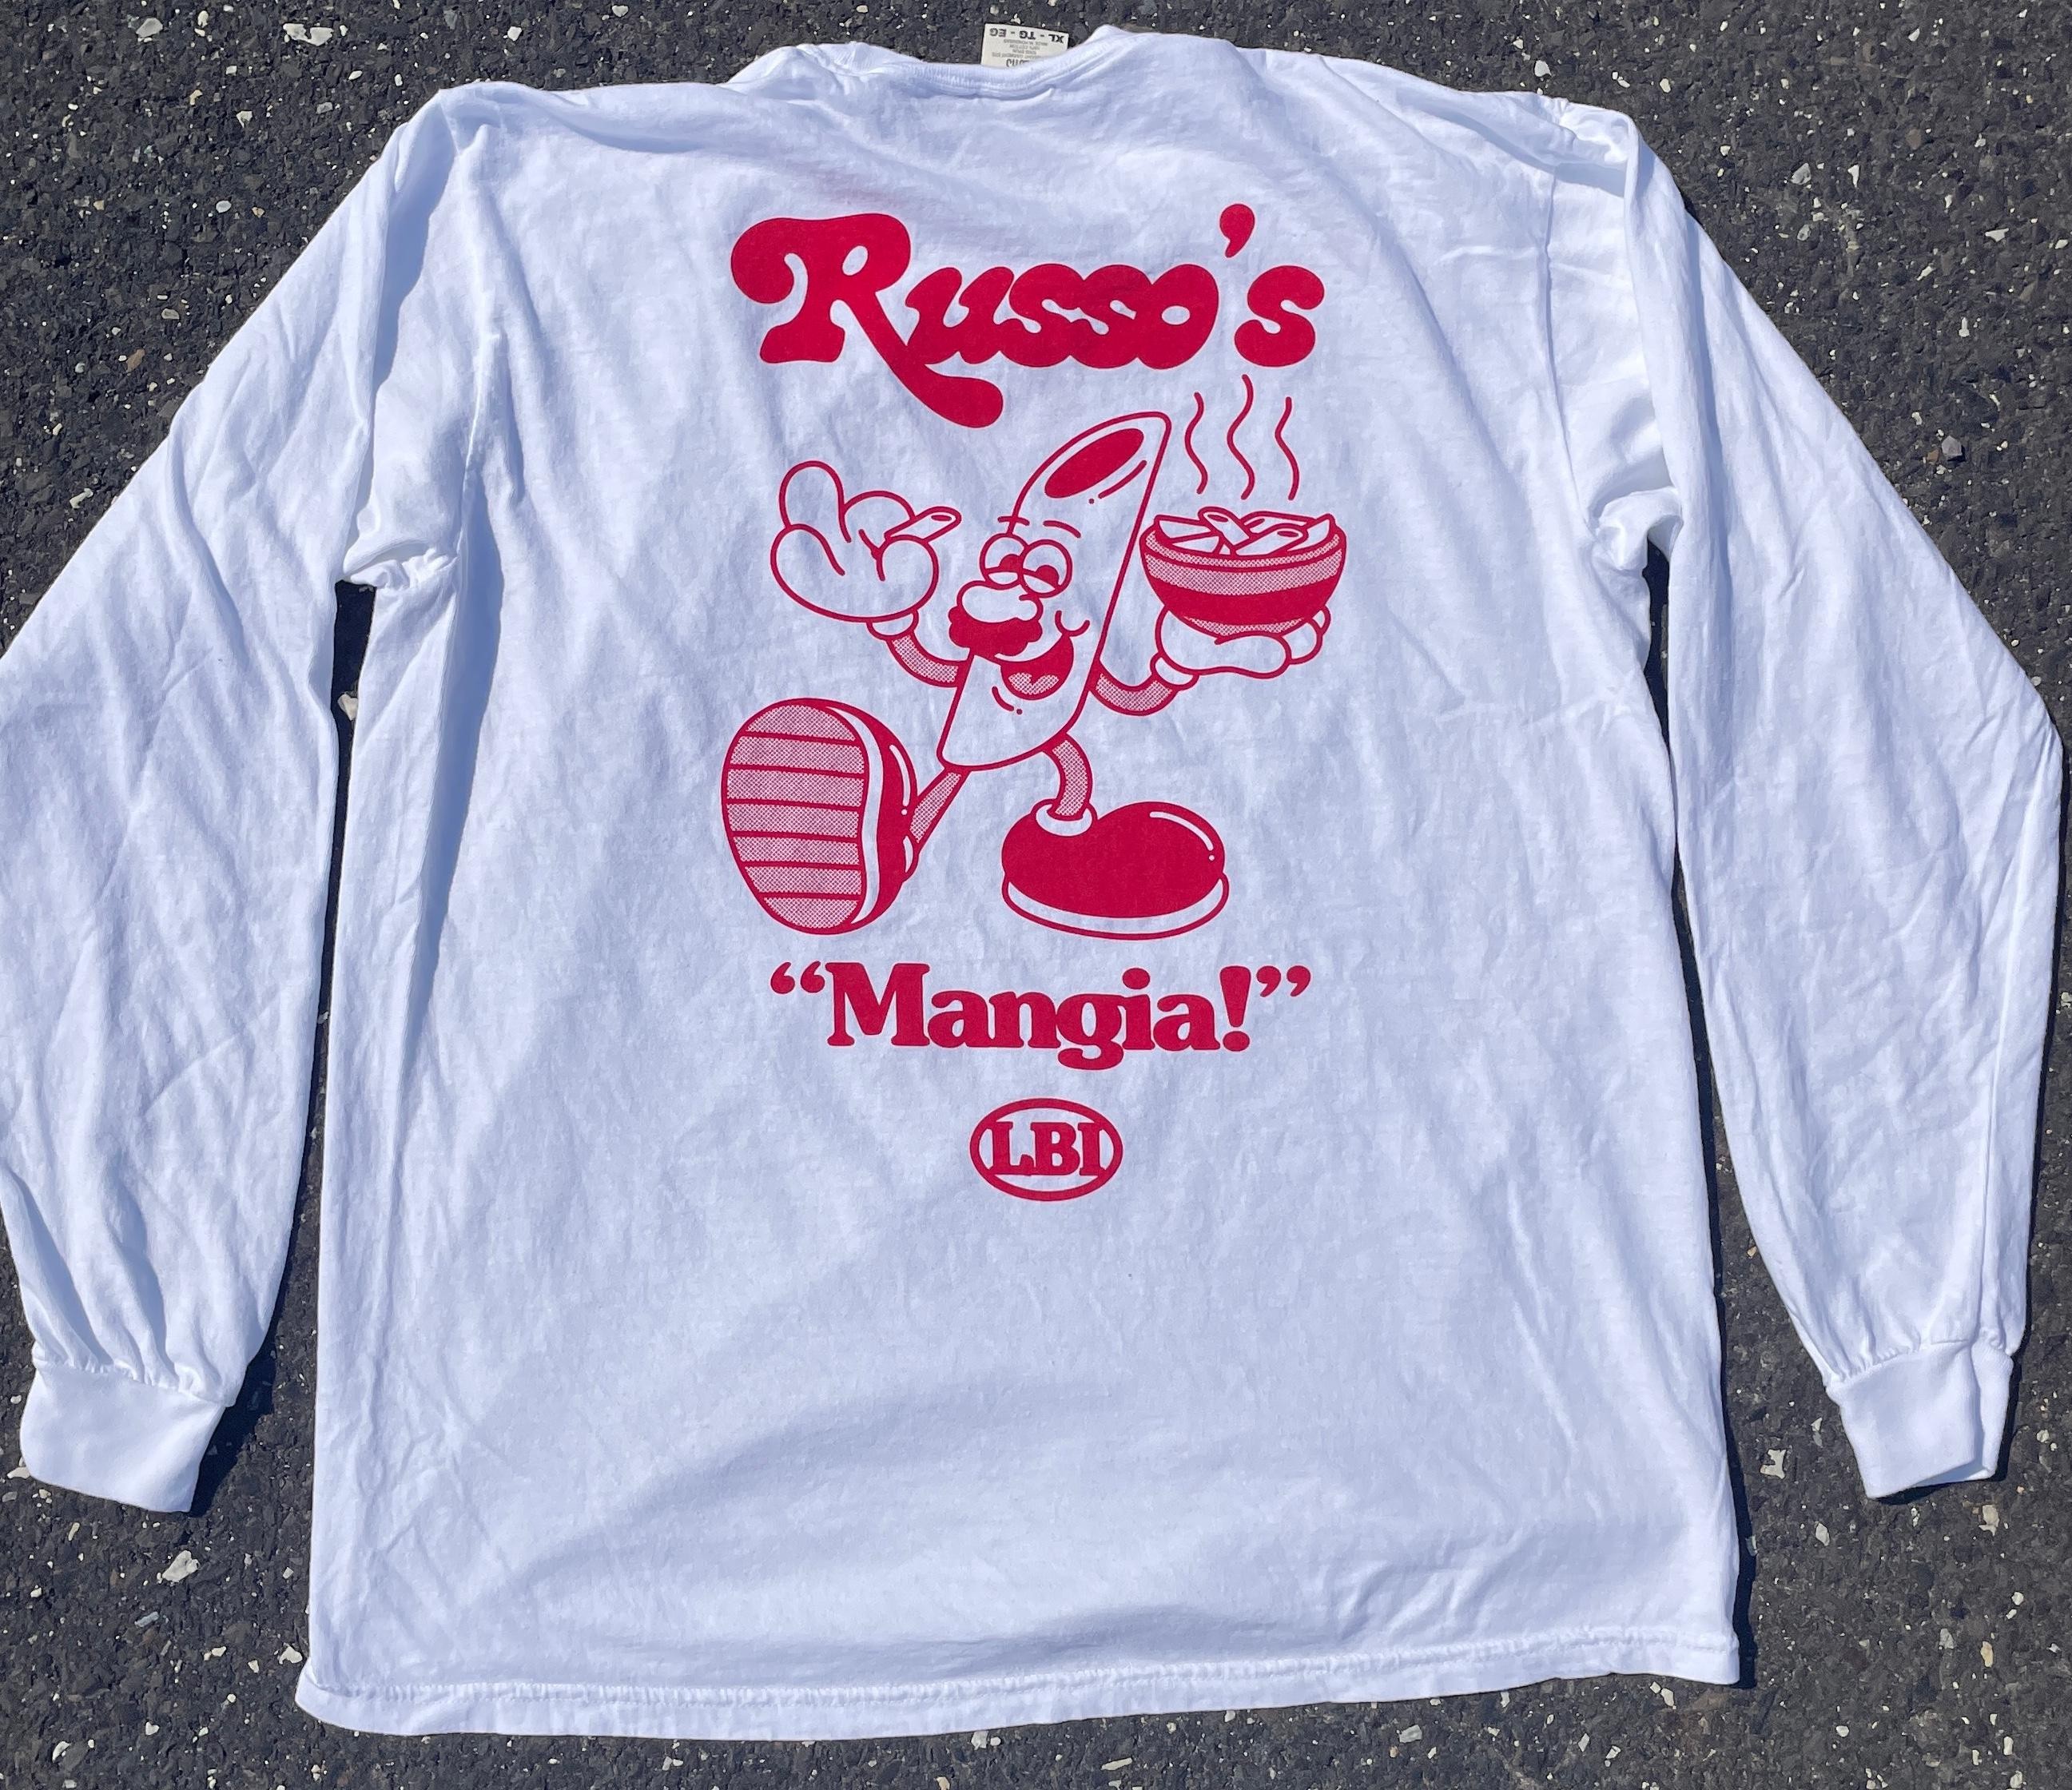 White Russo's long sleeve T